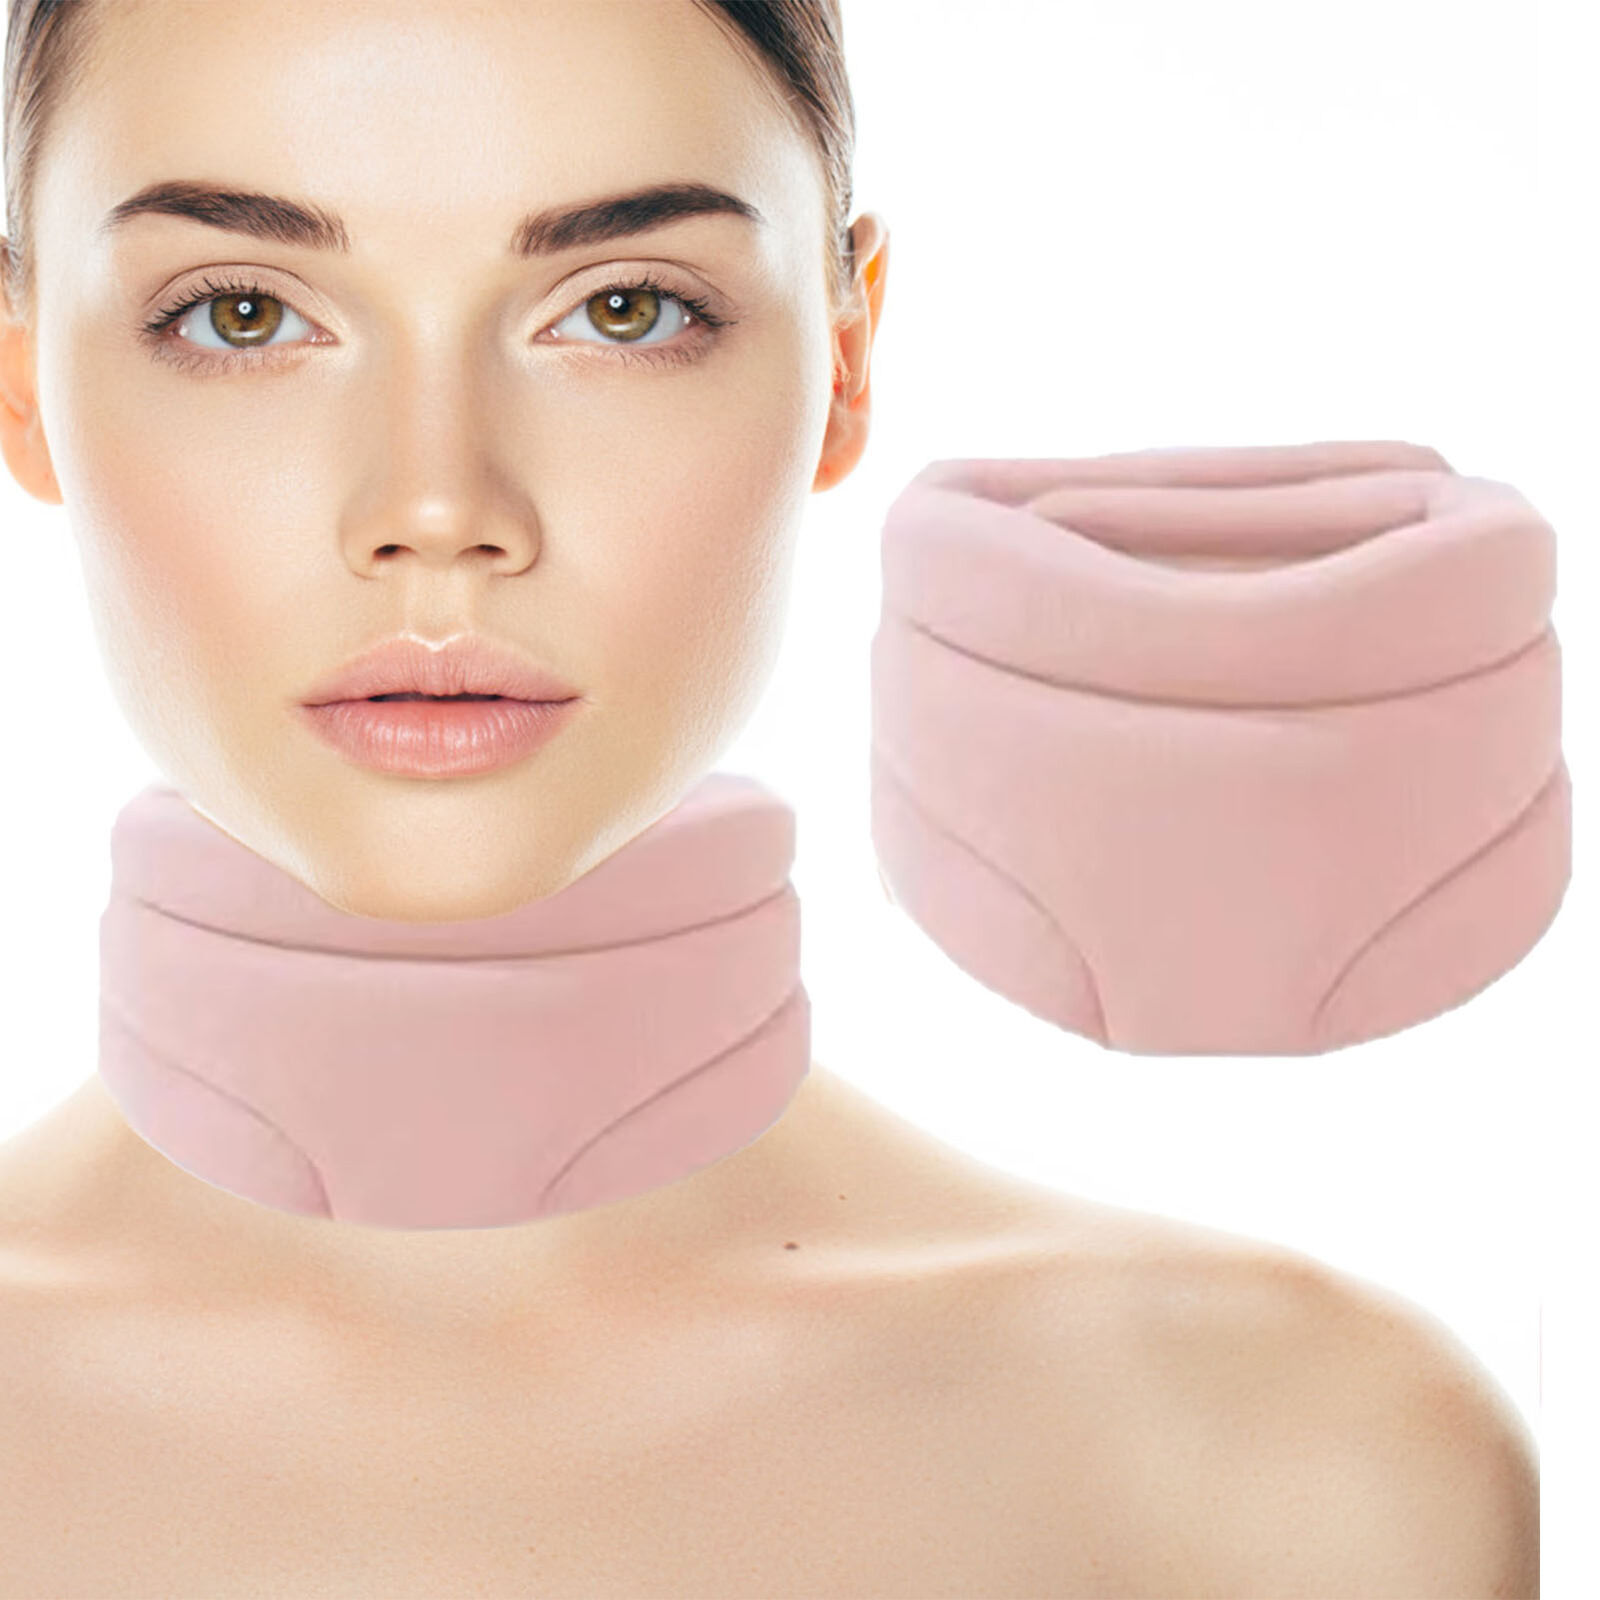 Cervicorrect Neck Brace Correct Cervical Support Stop Snore by